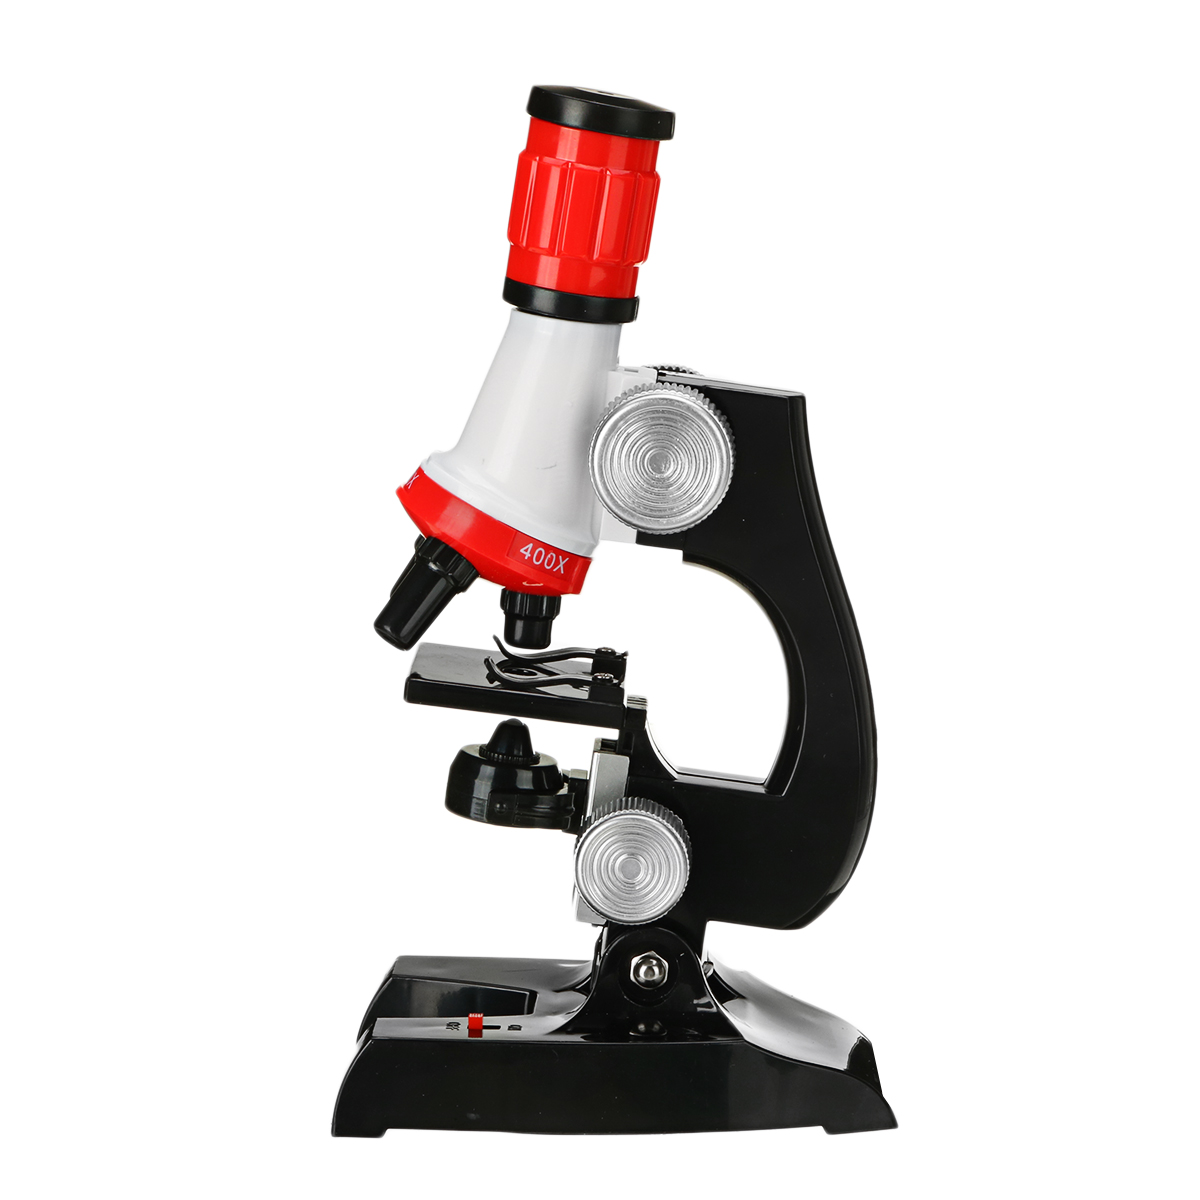 Children-Biological-Microscope-Kit-Lab-LED-100X-400X-1200X-Home-School-Science-Educational-Toy-Gift--1903472-5